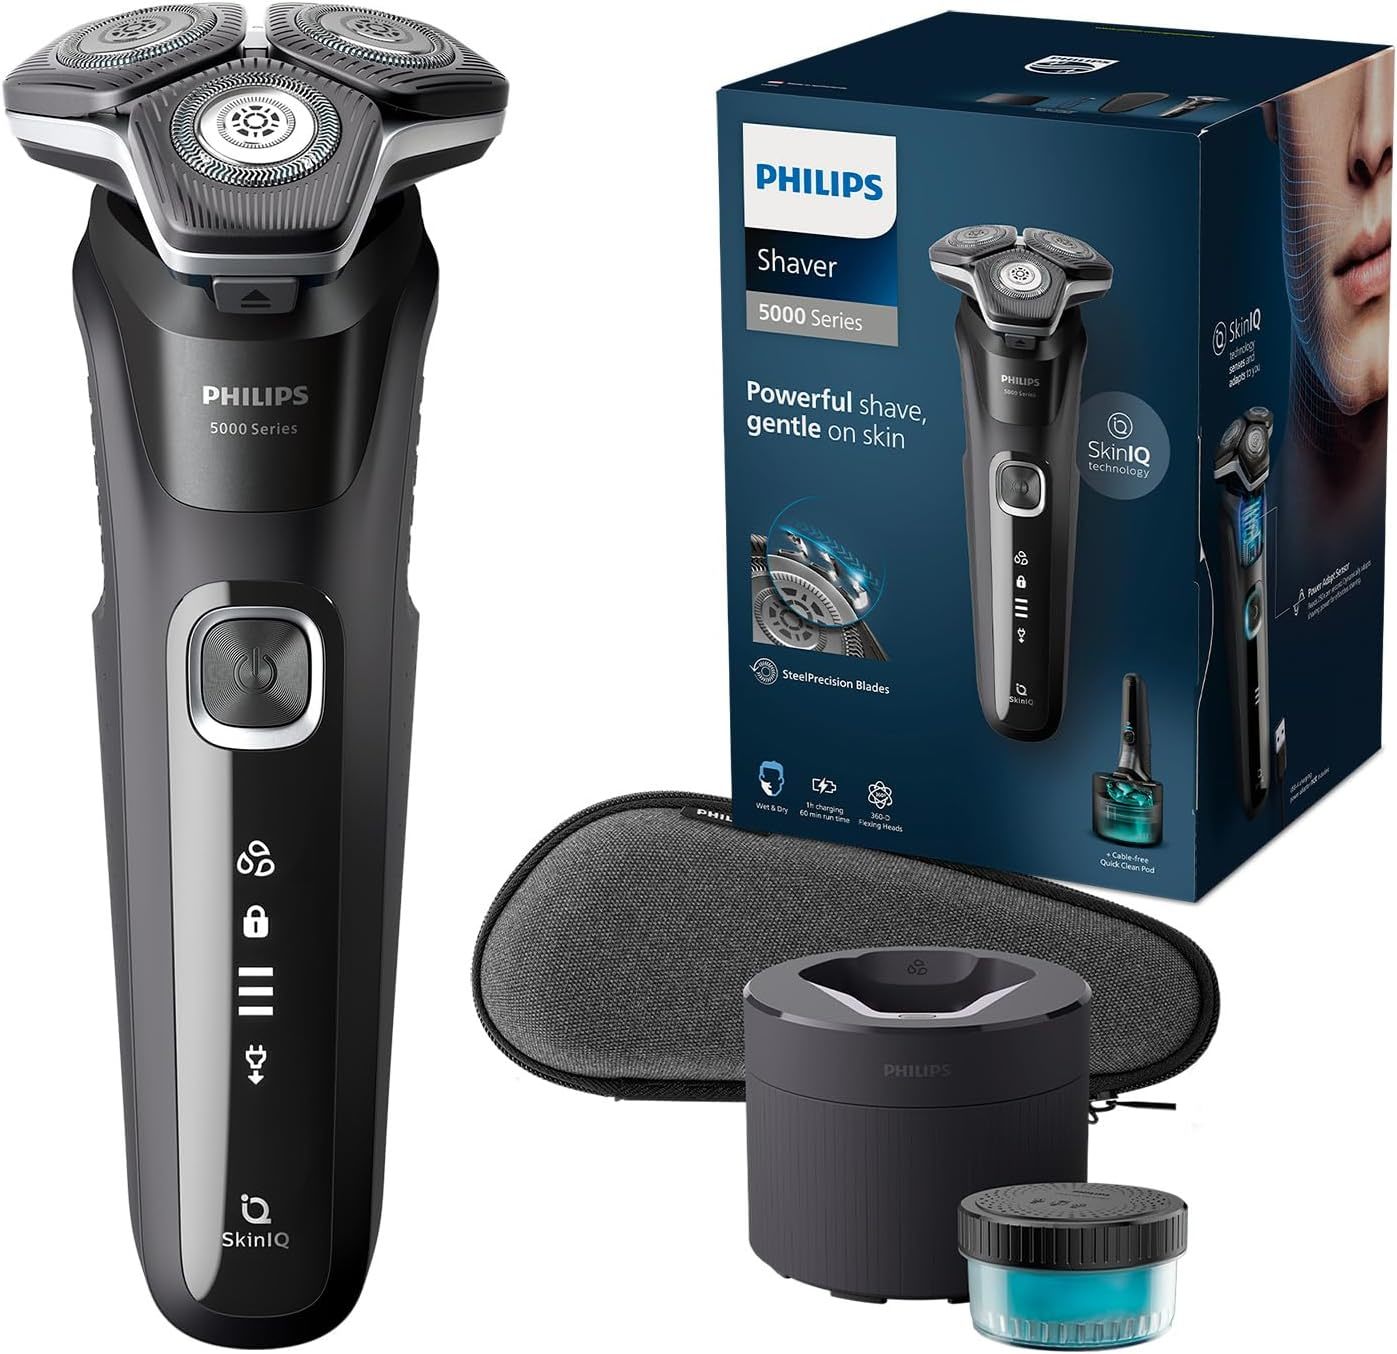 Philips Shaver S5000 - Wet and Dry Electric Shaver for Men, Technology - $329.00